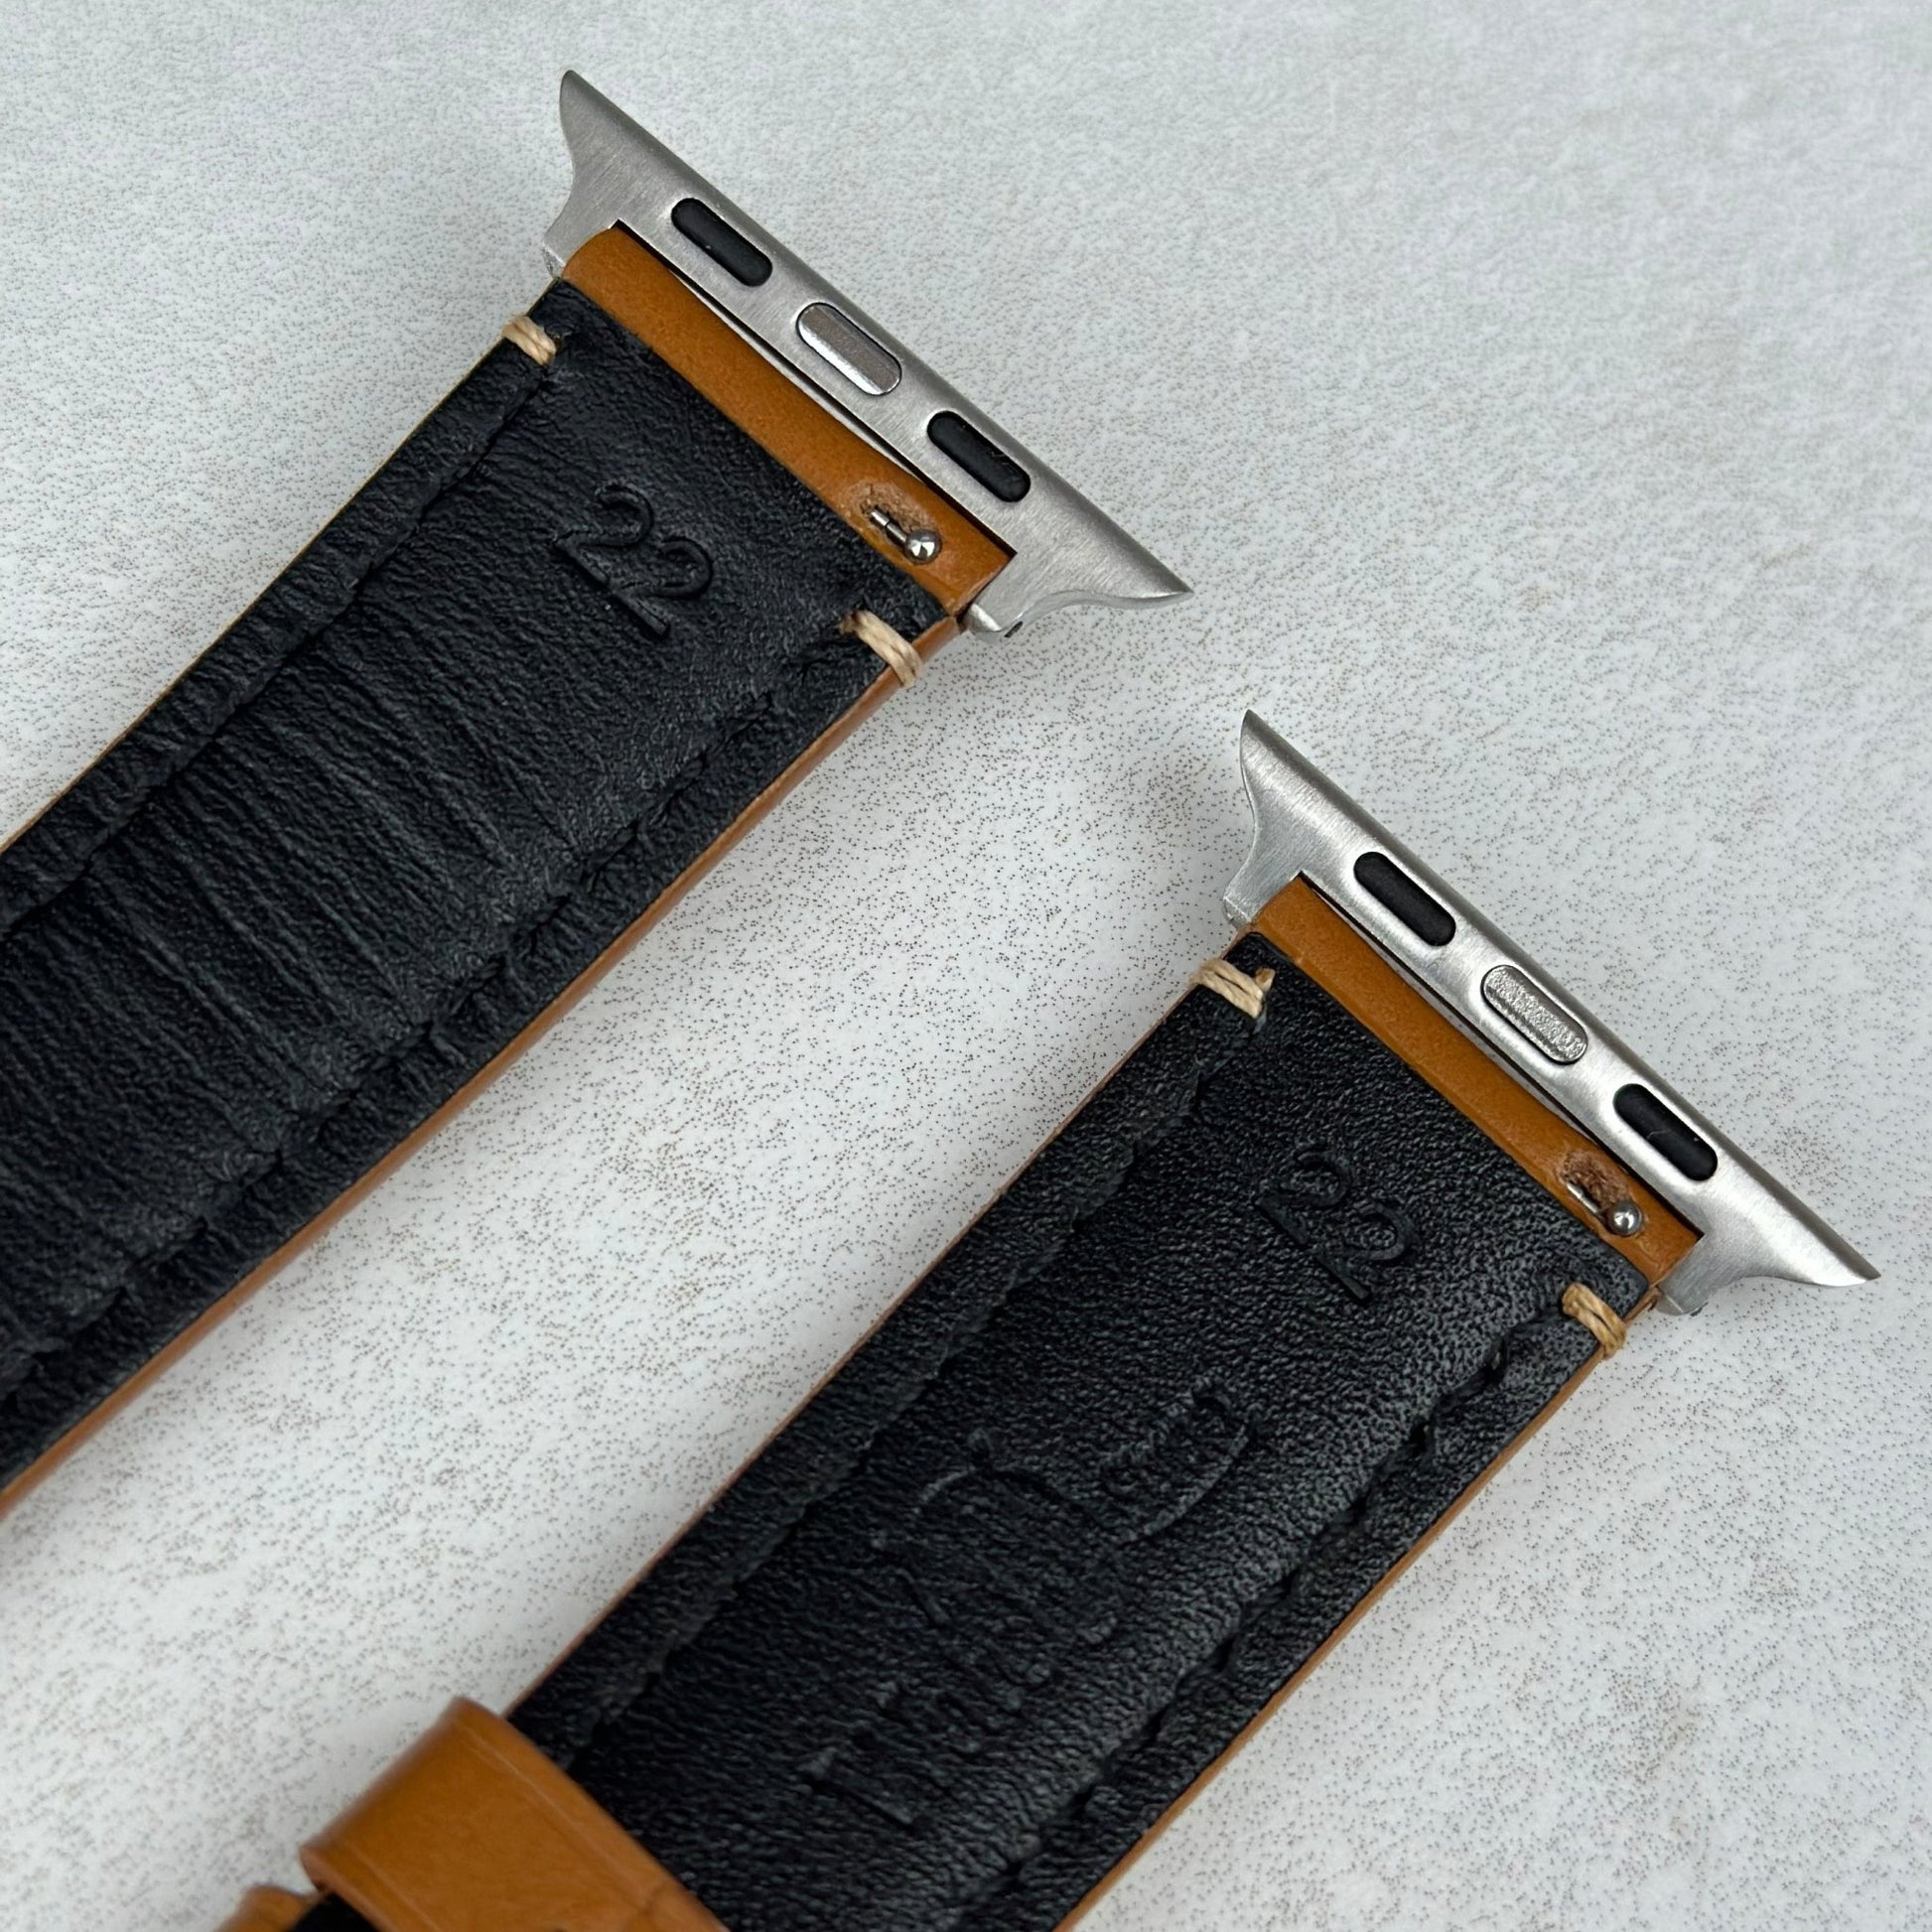 Top of the Oslo tan full grain leather Apple Watch strap. Black sweat resistant leather. Watch And Strap.